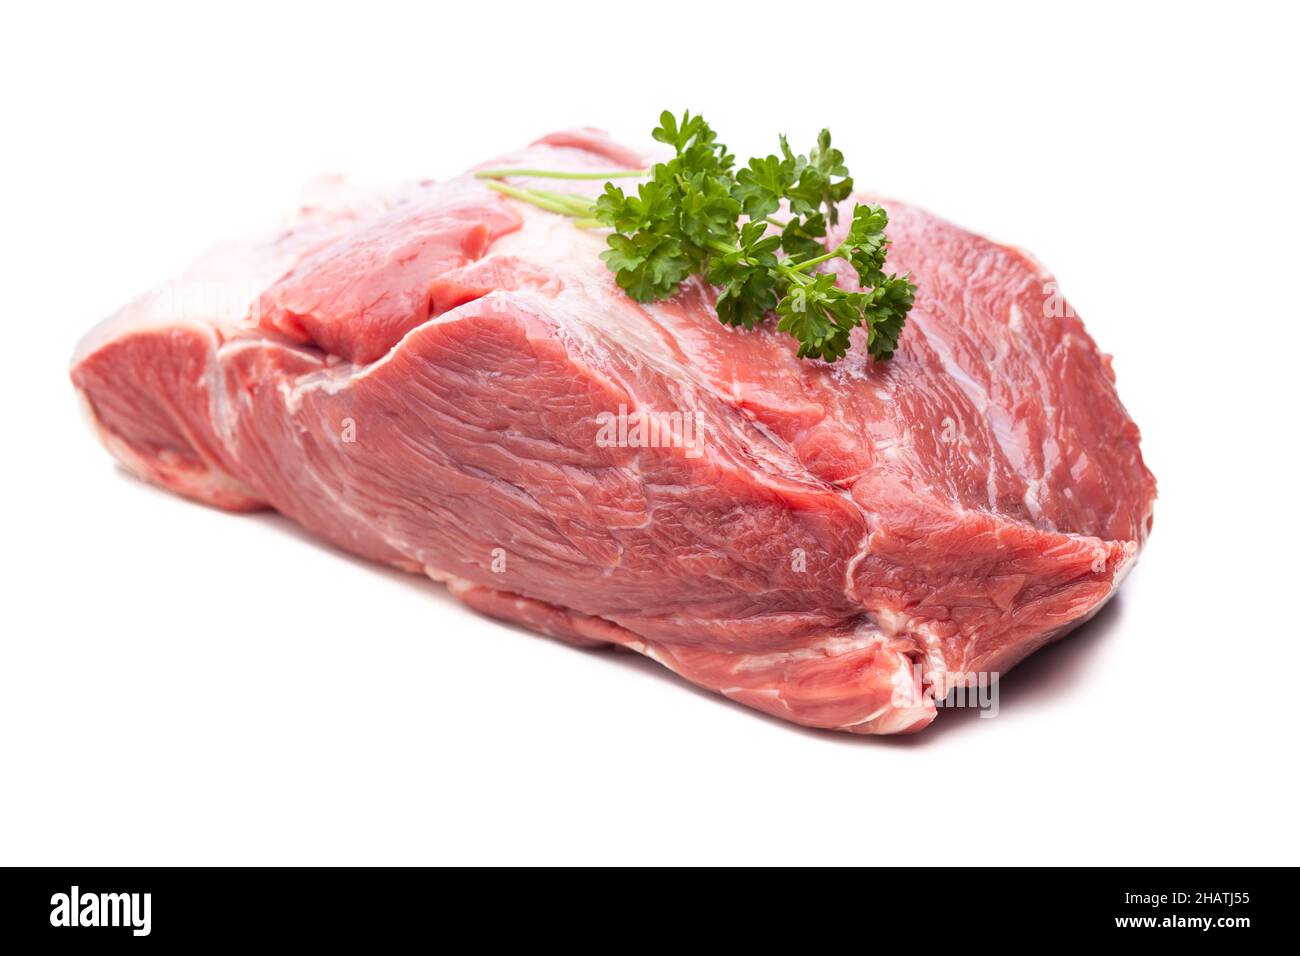 steak, steak meat, raw, beef steak, fresh, bloody, basil, thick, meat, beef, one, roast, background, isolated, good, nutrition, parsley, pink, red, wh Stock Photo